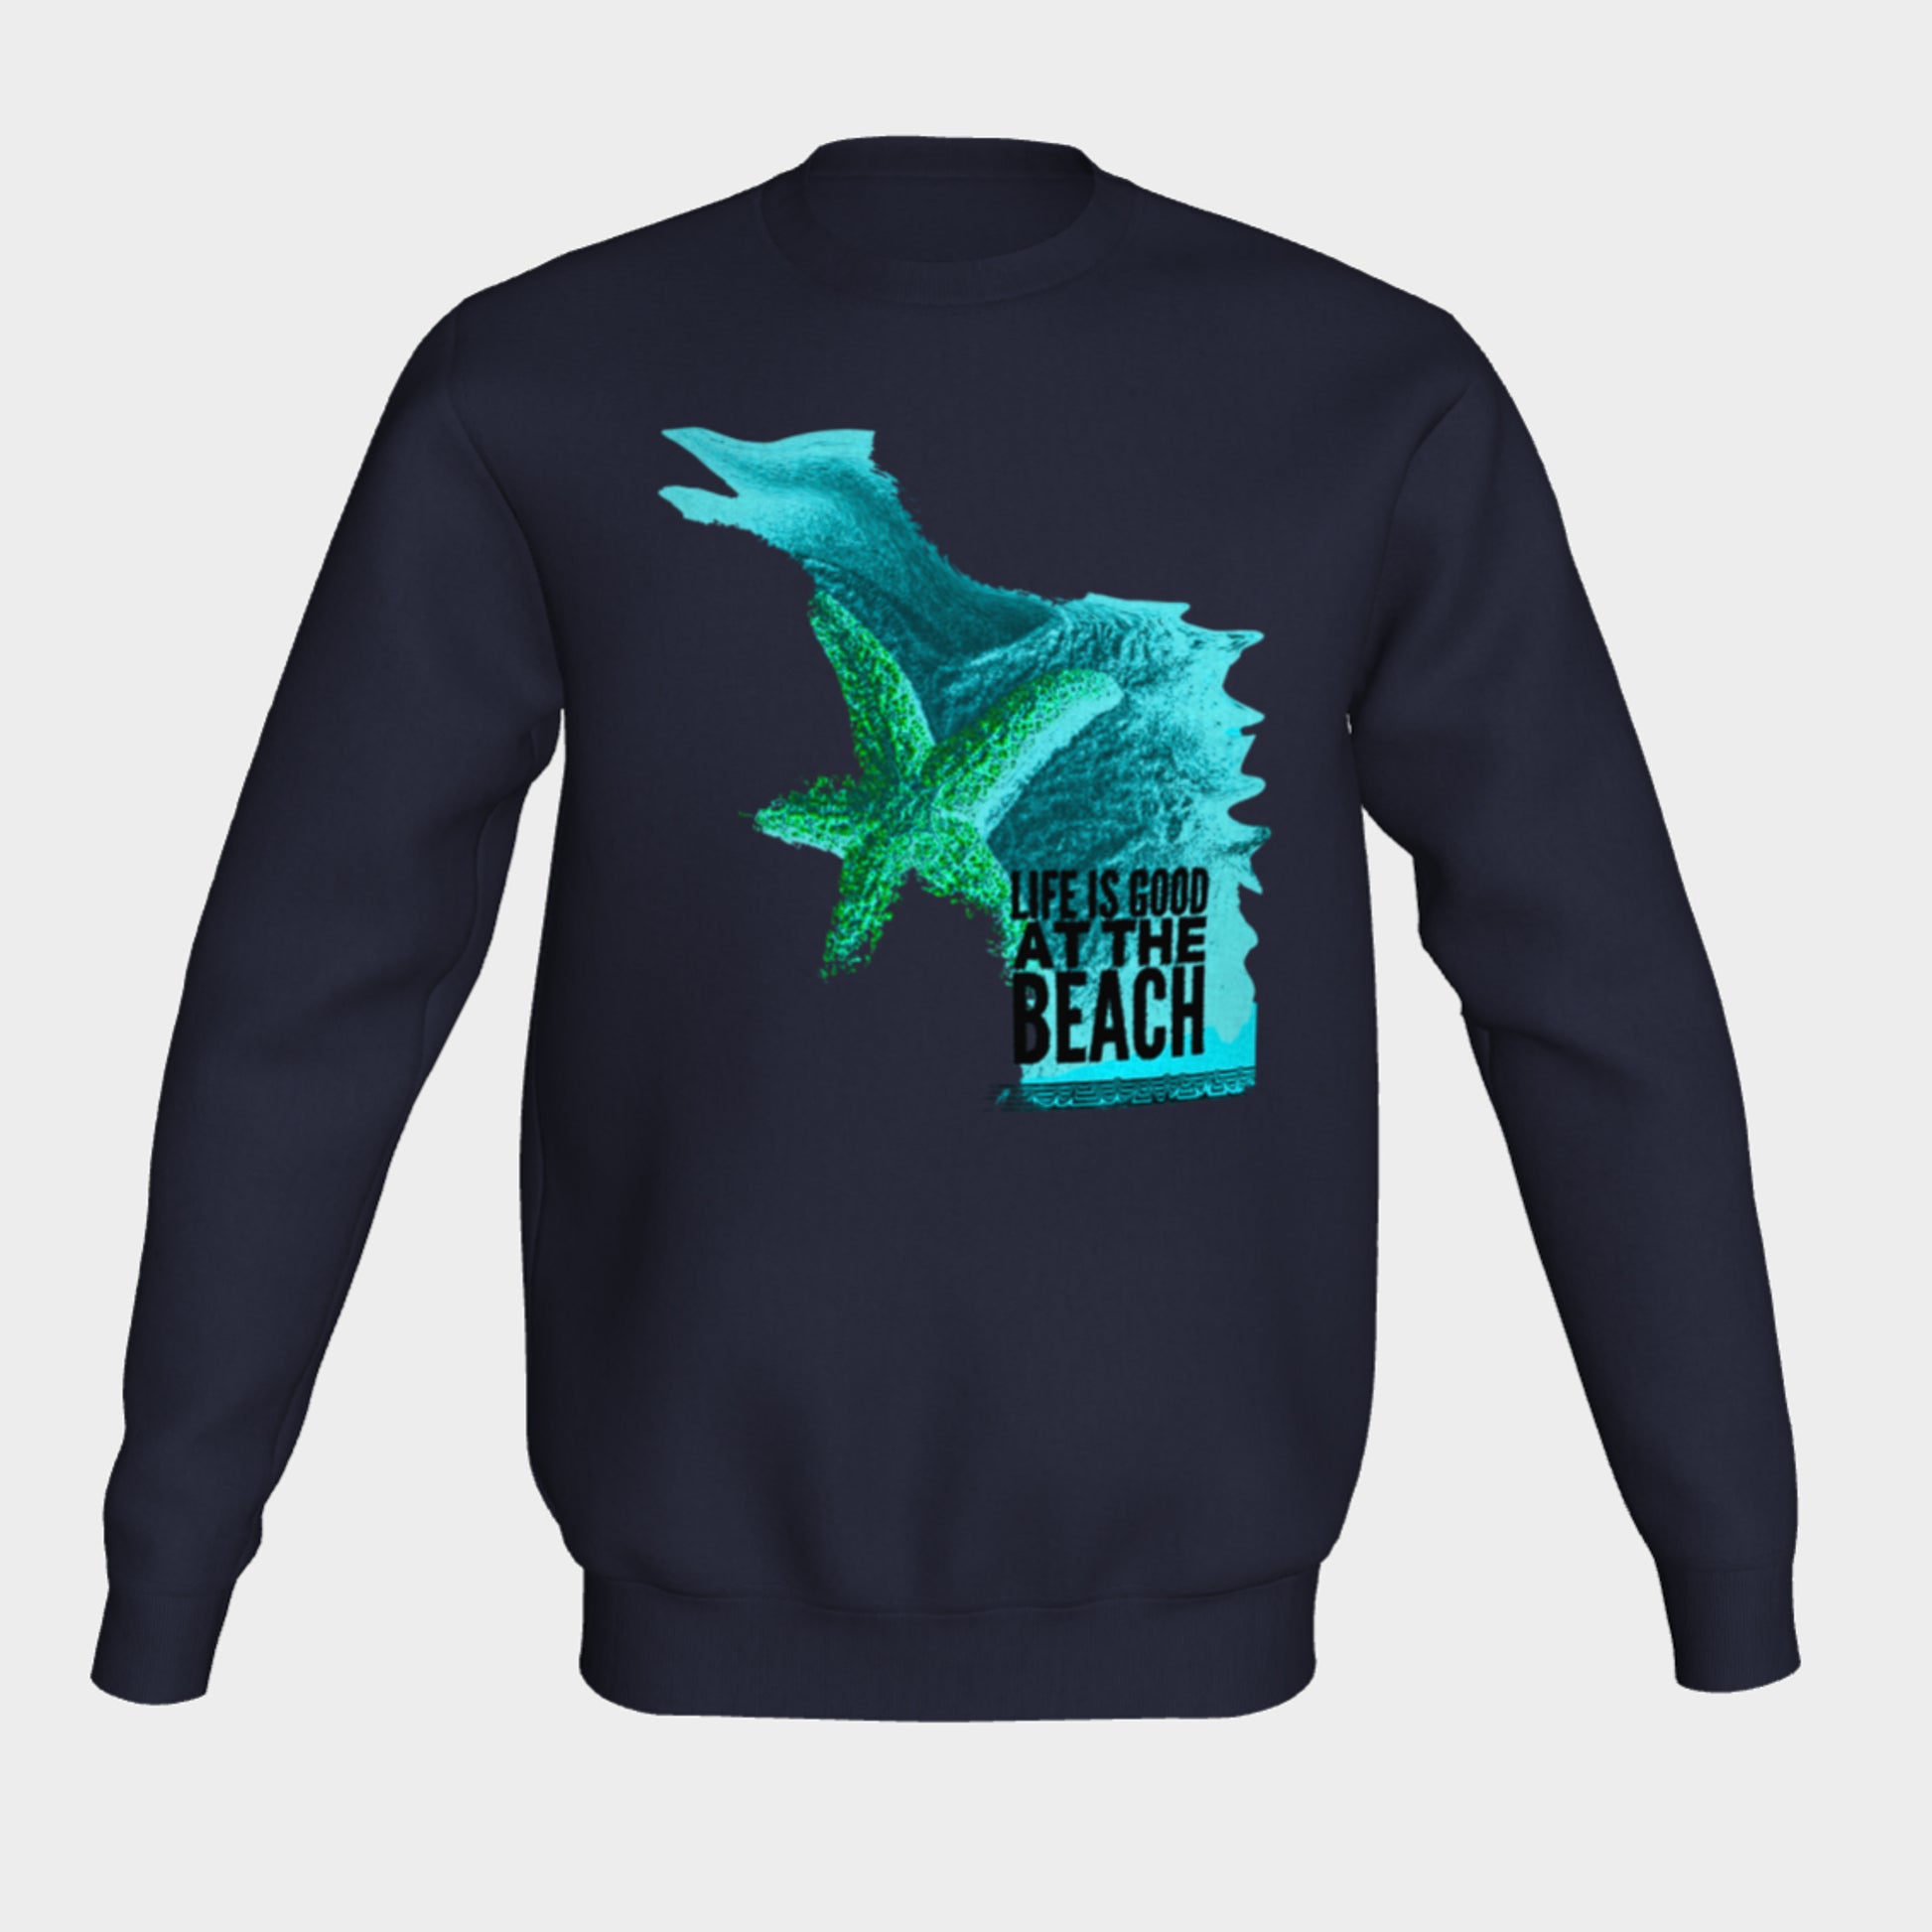 Life Is Good at The Beach Crewneck Sweatshirt What’s better than a super cozy sweatshirt? A super cozy sweatshirt from Van Isle Goddess!  Super cozy unisex sweatshirt for those chilly days.  Excellent for men or women.   Fit is roomy and comfortable. 